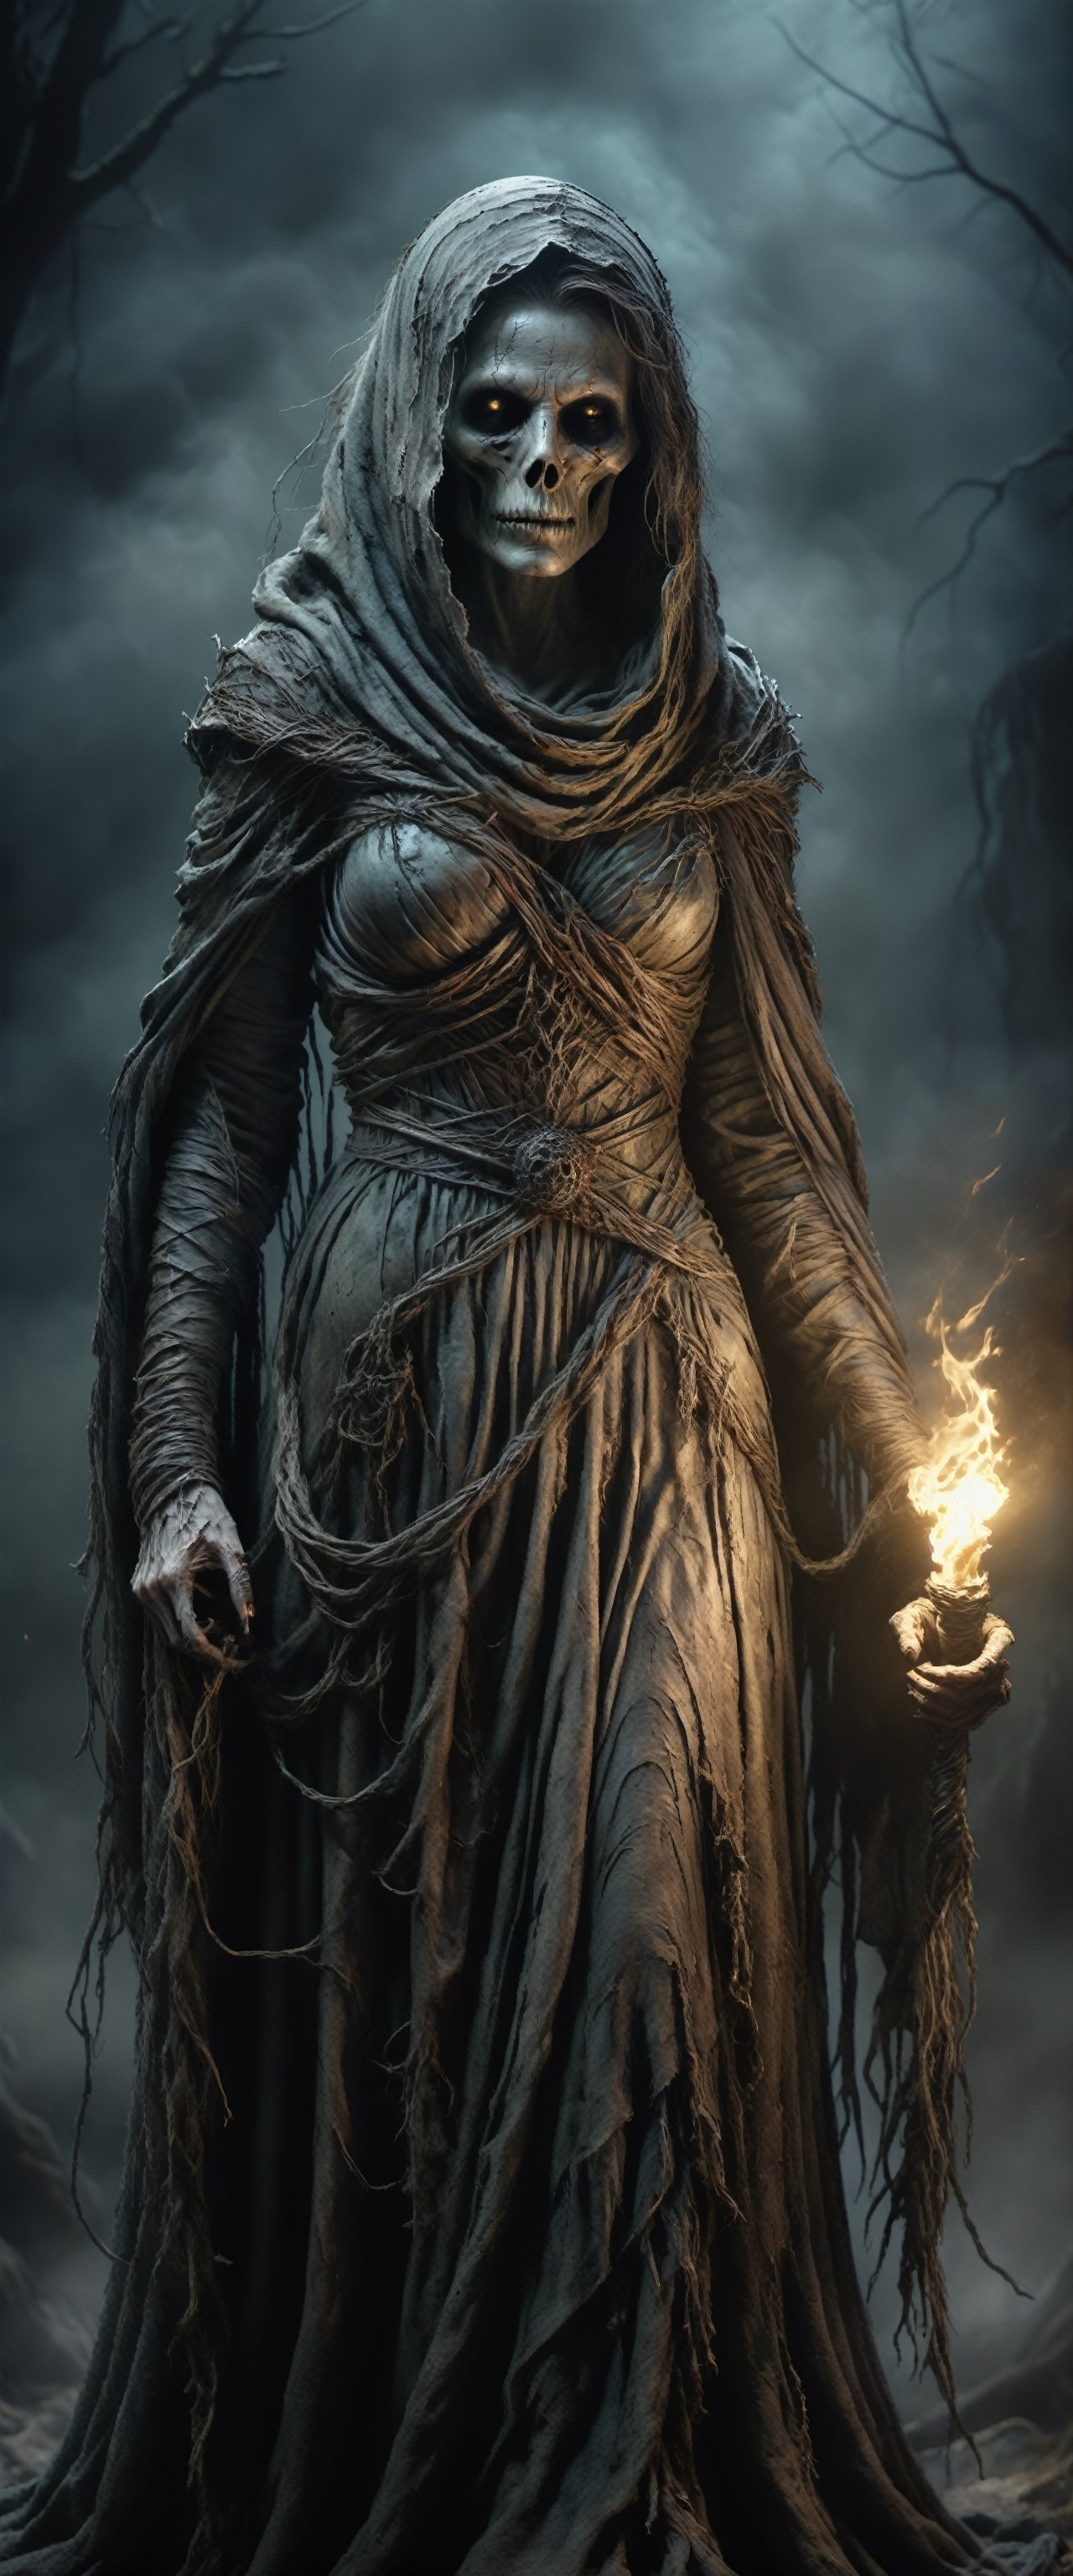 ((8k, extremely high-resolution)), image of a wraith, a malevolent spirit of a woman who wanders in search of souls to claim, holding a spectral light torch, bleak and scary, death and despair, soft and threatening colors, dark, dim light, high level of detail and realism, 

more detail XL, detailmaster2